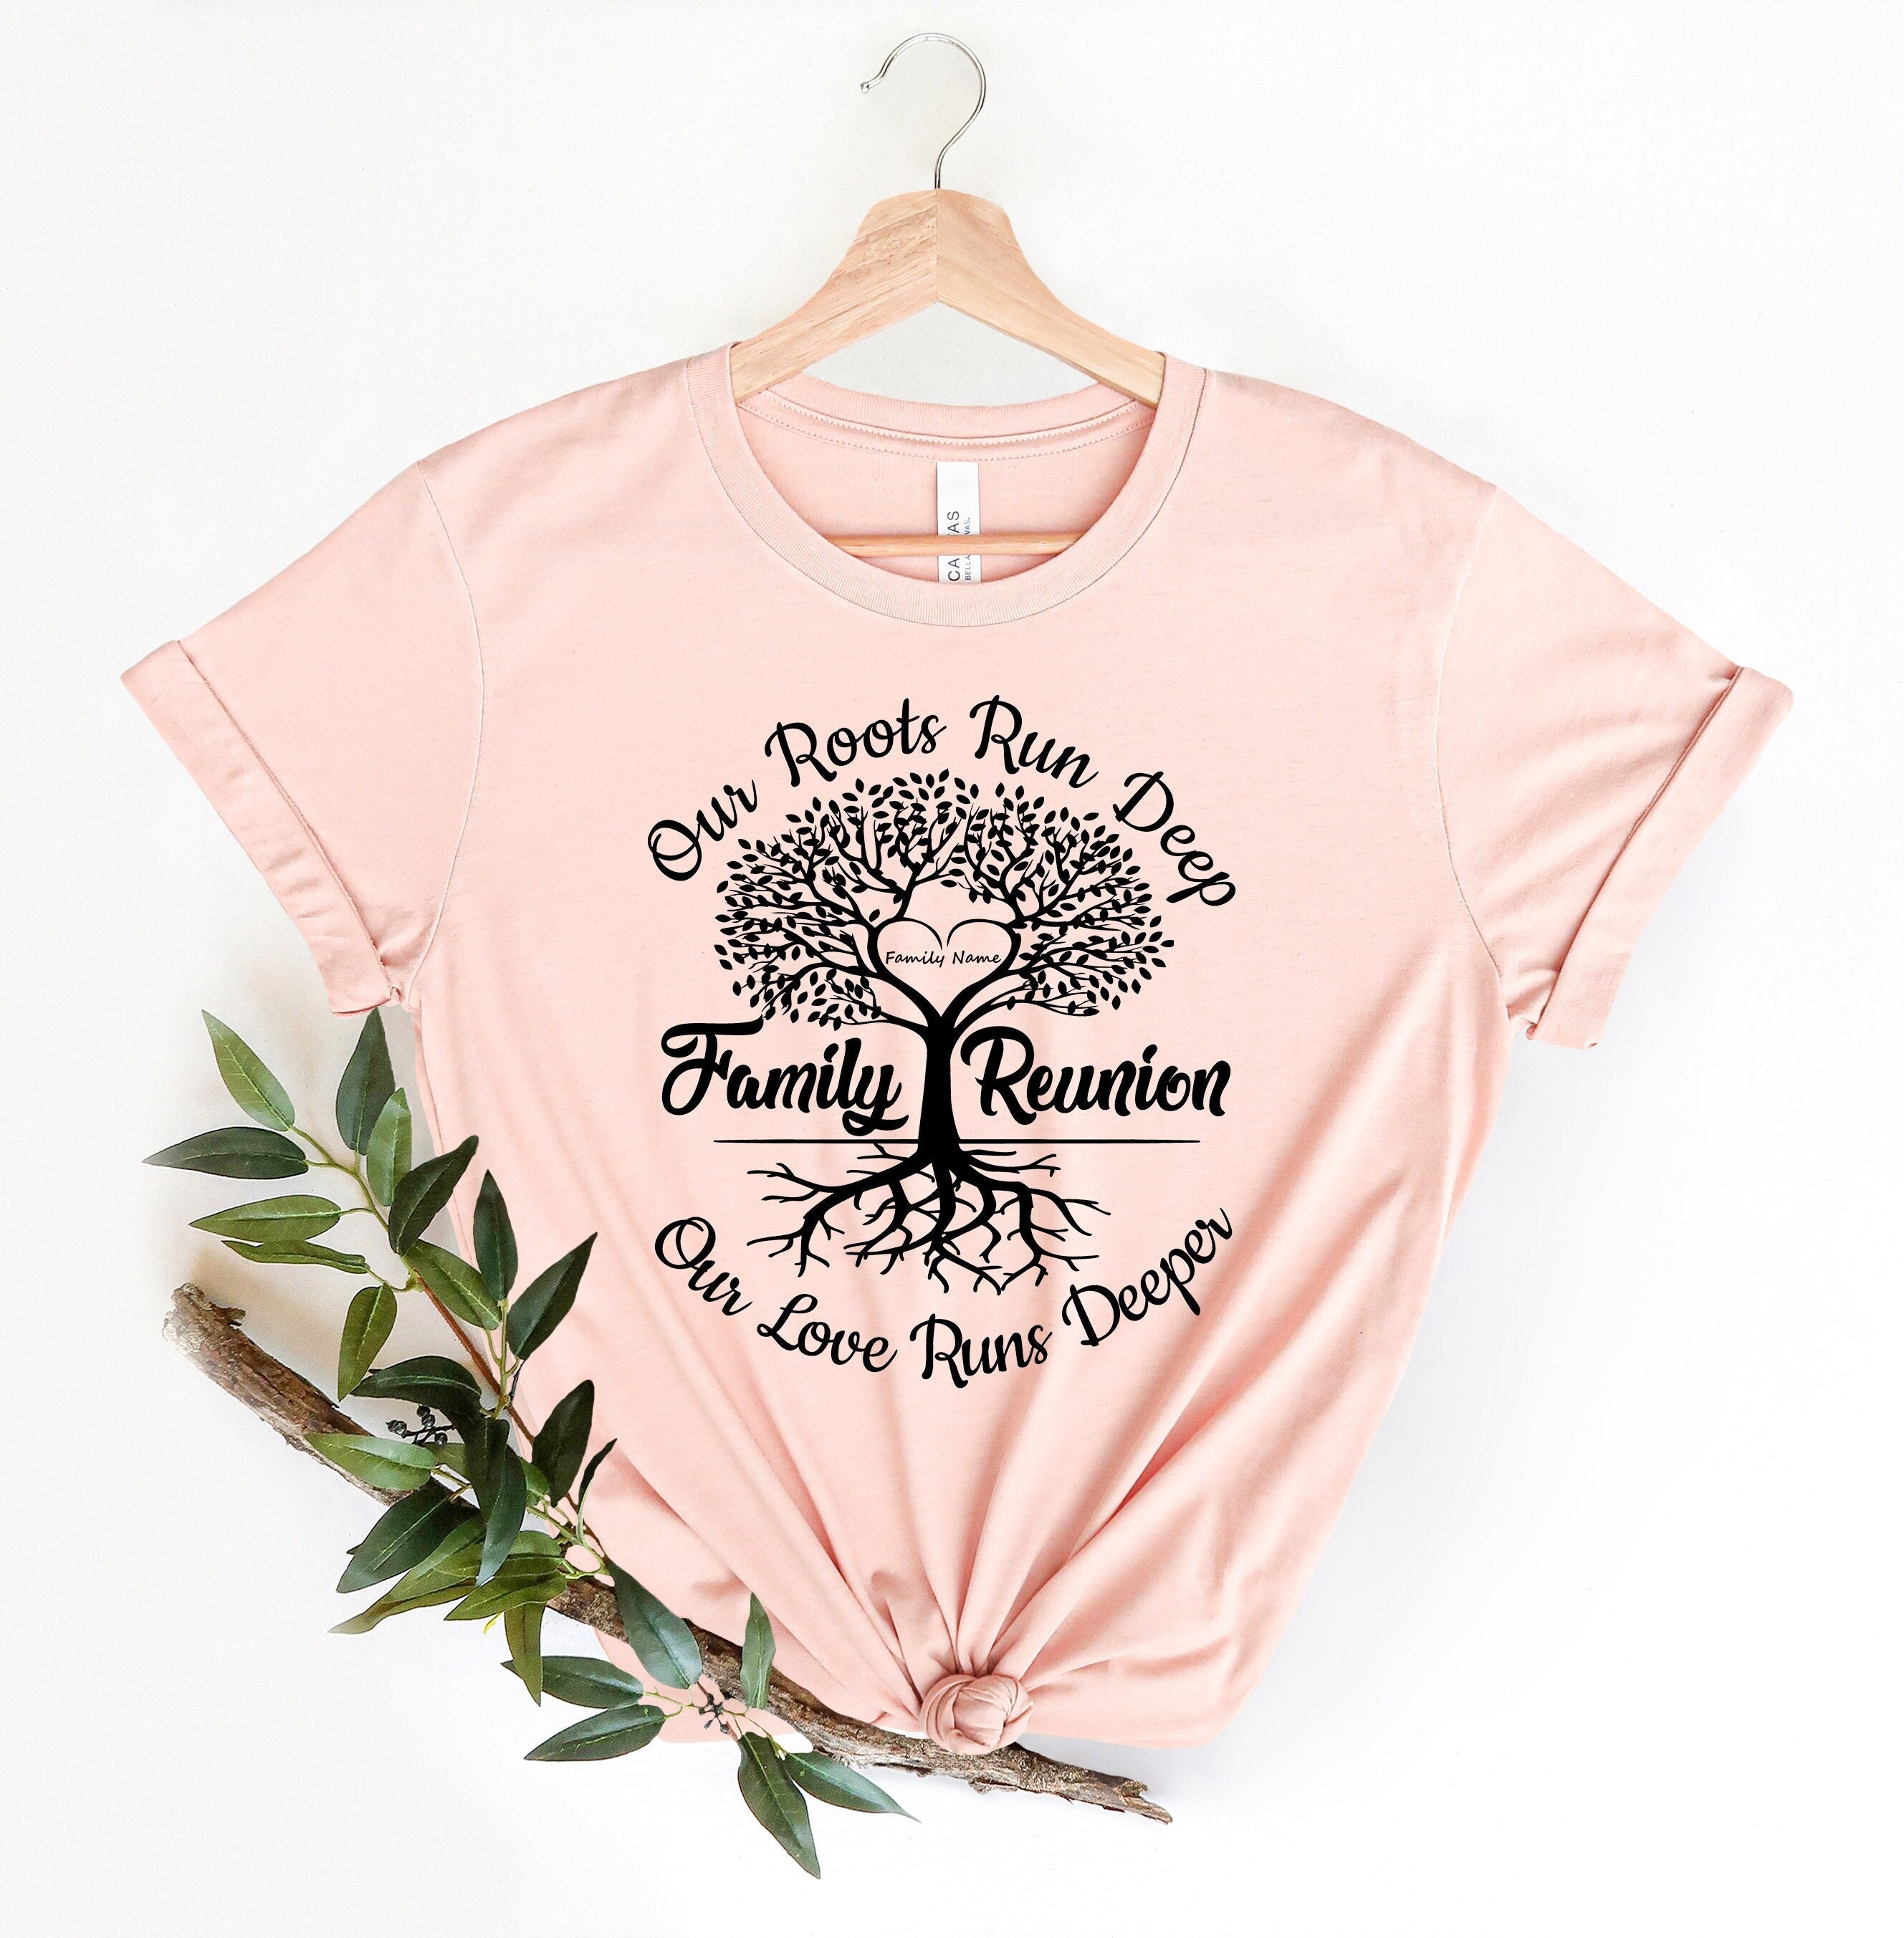 Genealogy T-Shirts for Sale